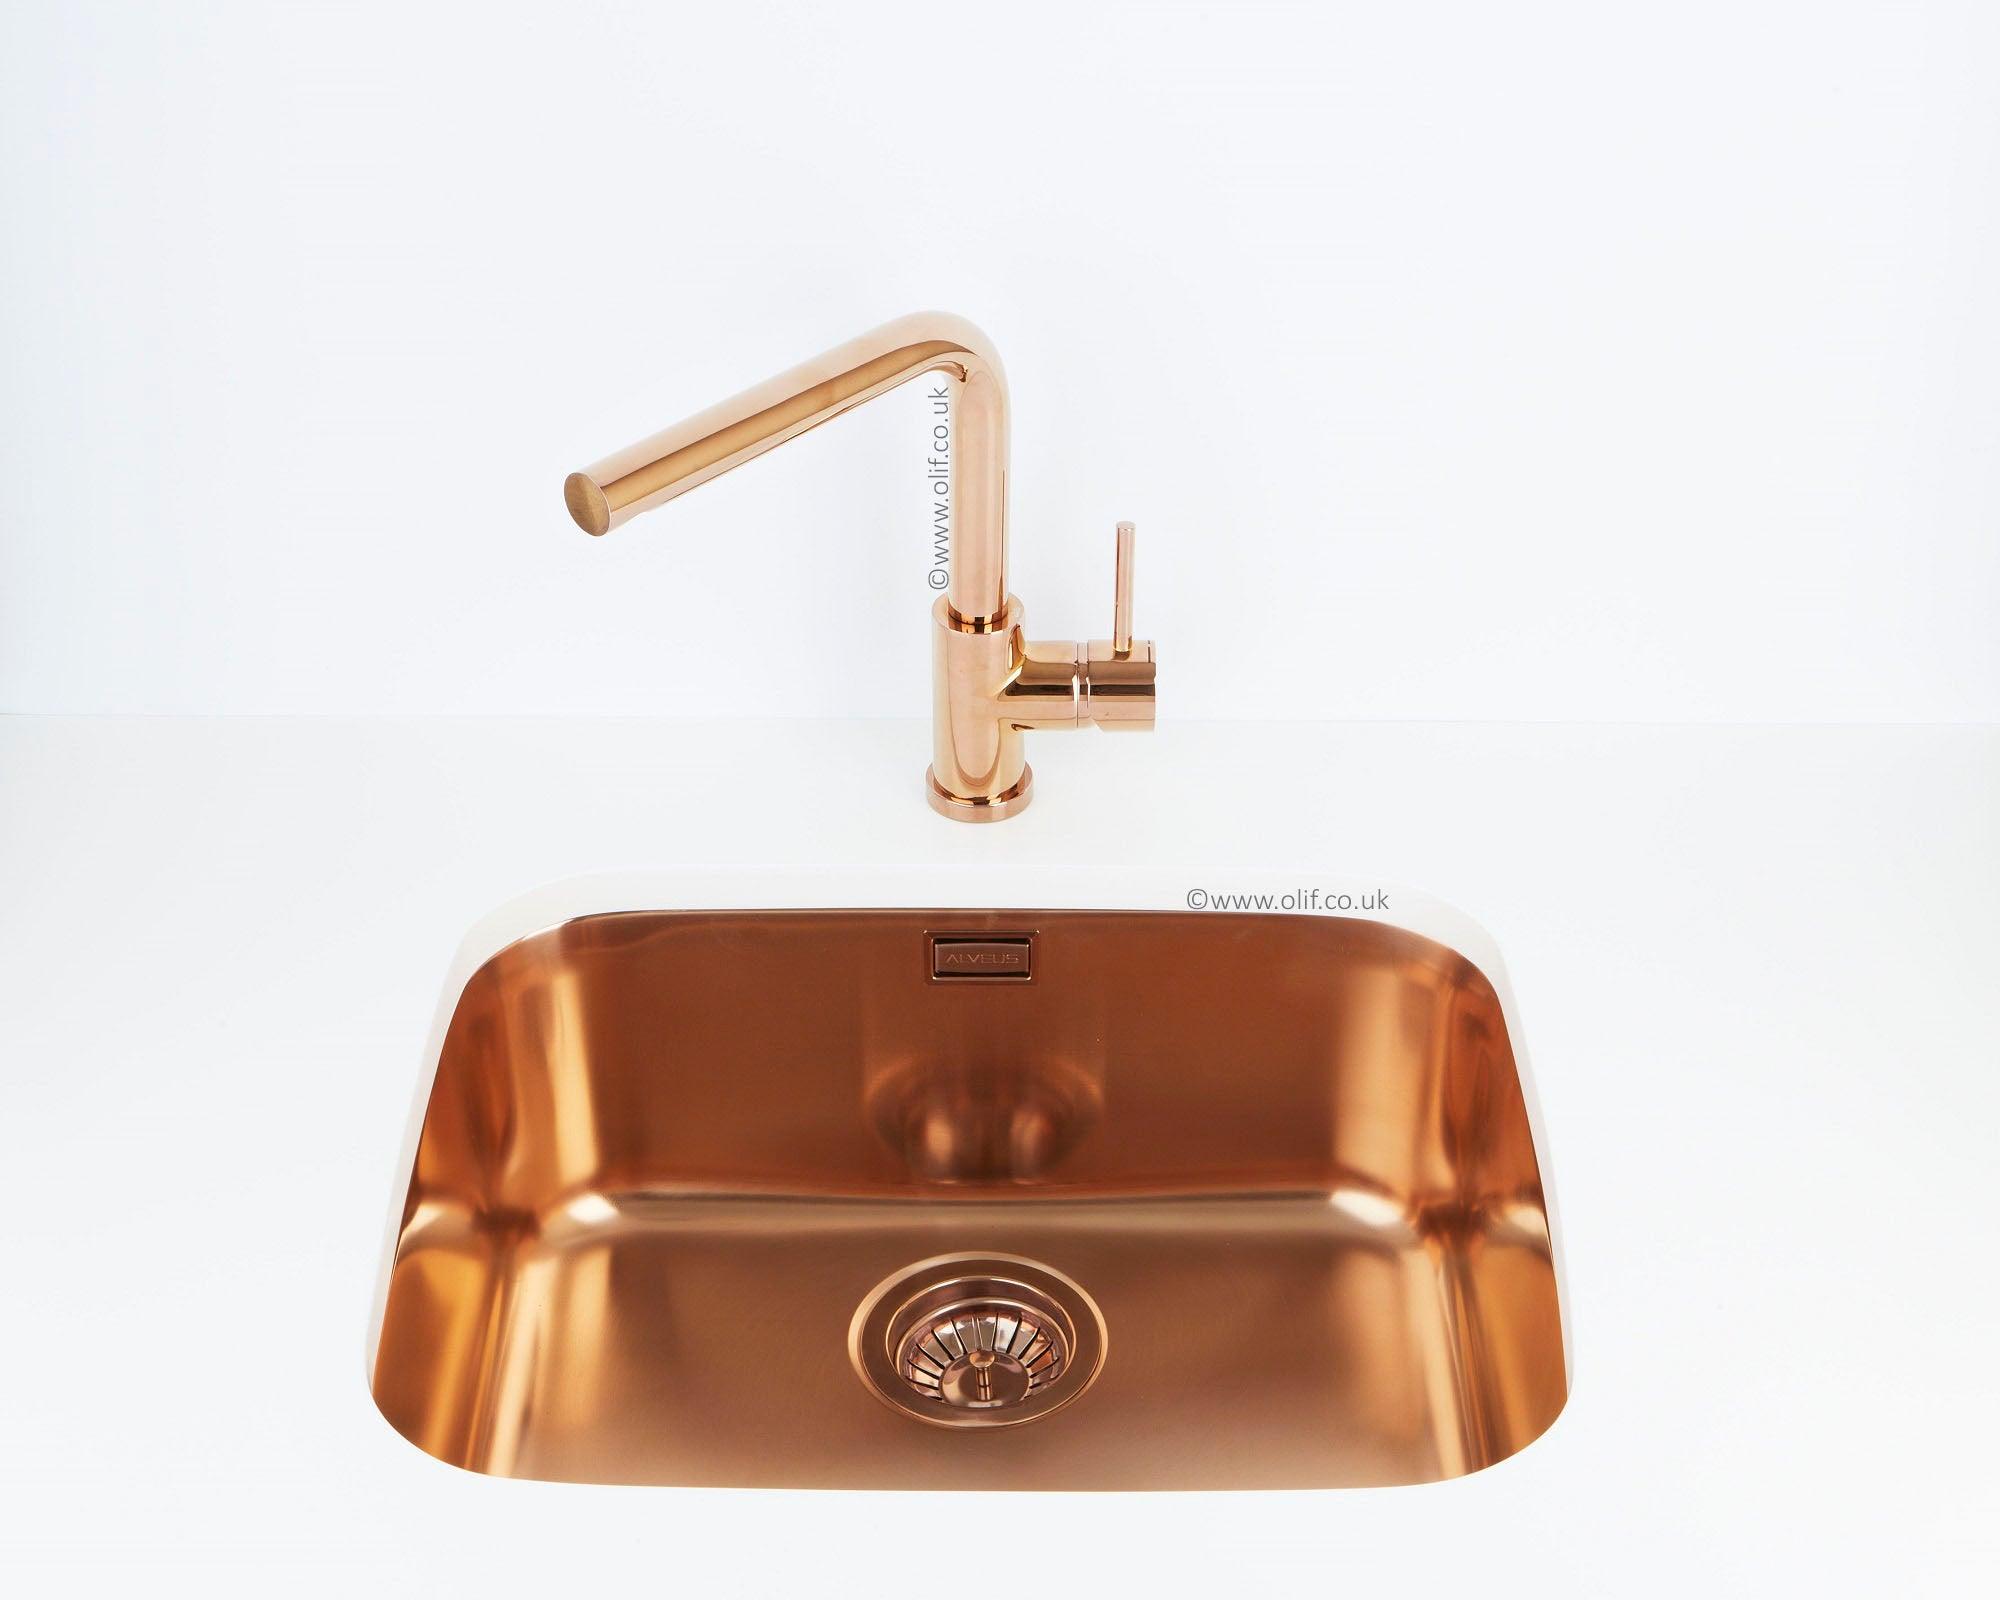 Pack of Alveus Monarch Variant 40 Copper sink and matching Copper tap - Olif